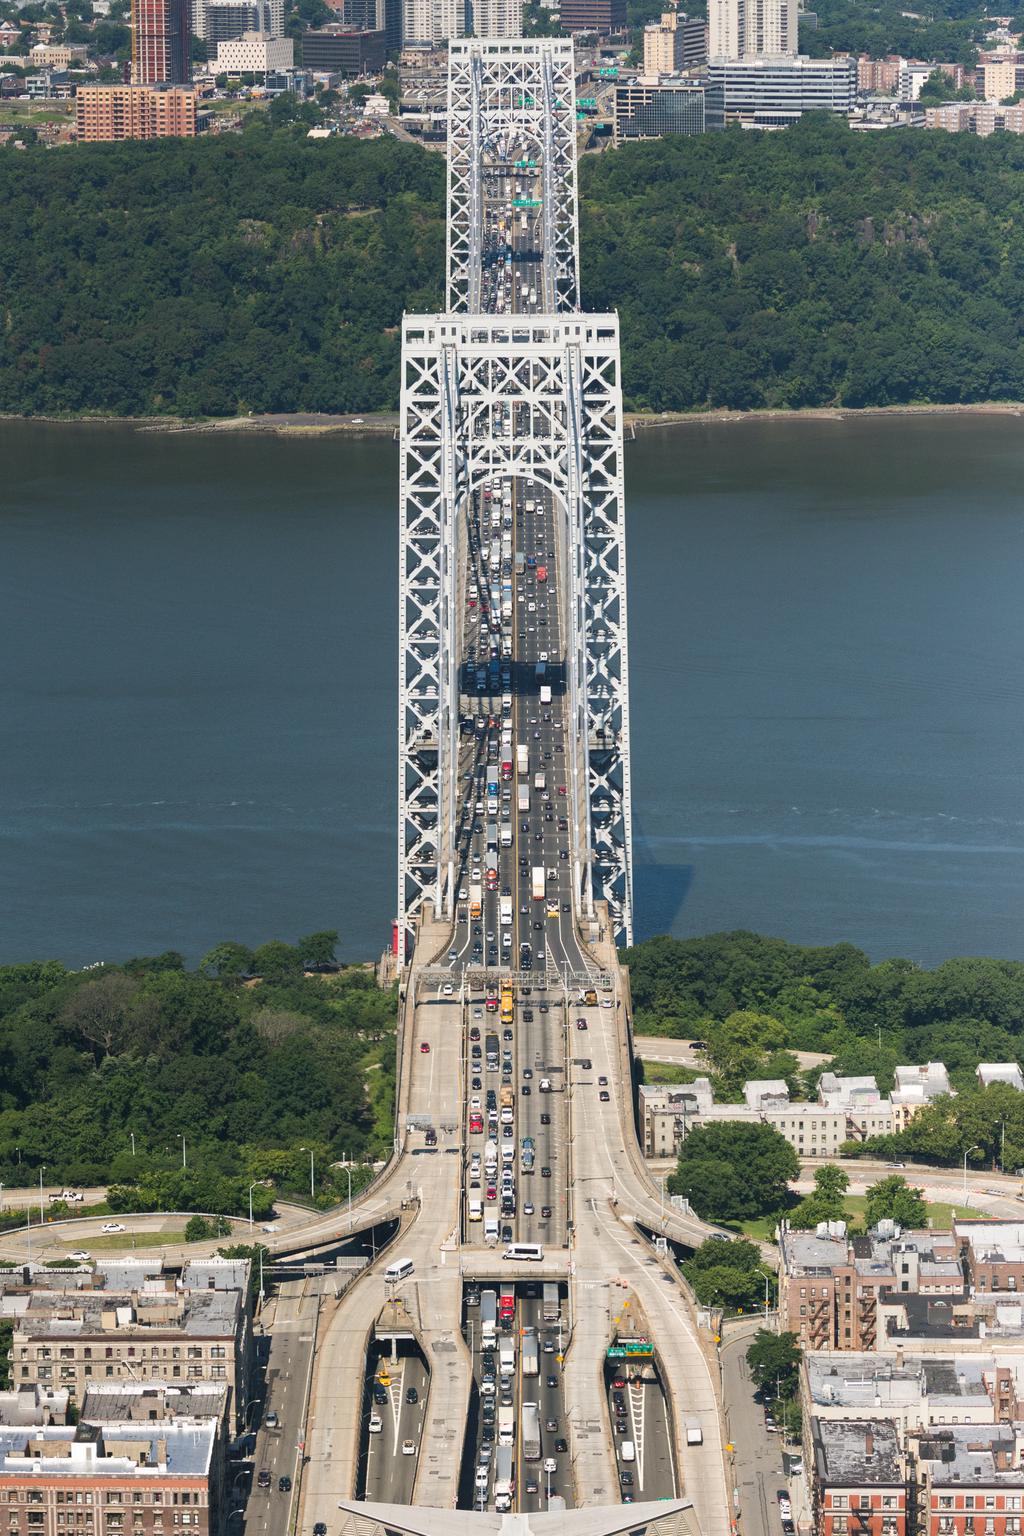 The George Washington bridge, over the Hudson river, from a directly aligned angle looking along the length of the bridge, from the Manhattan side.